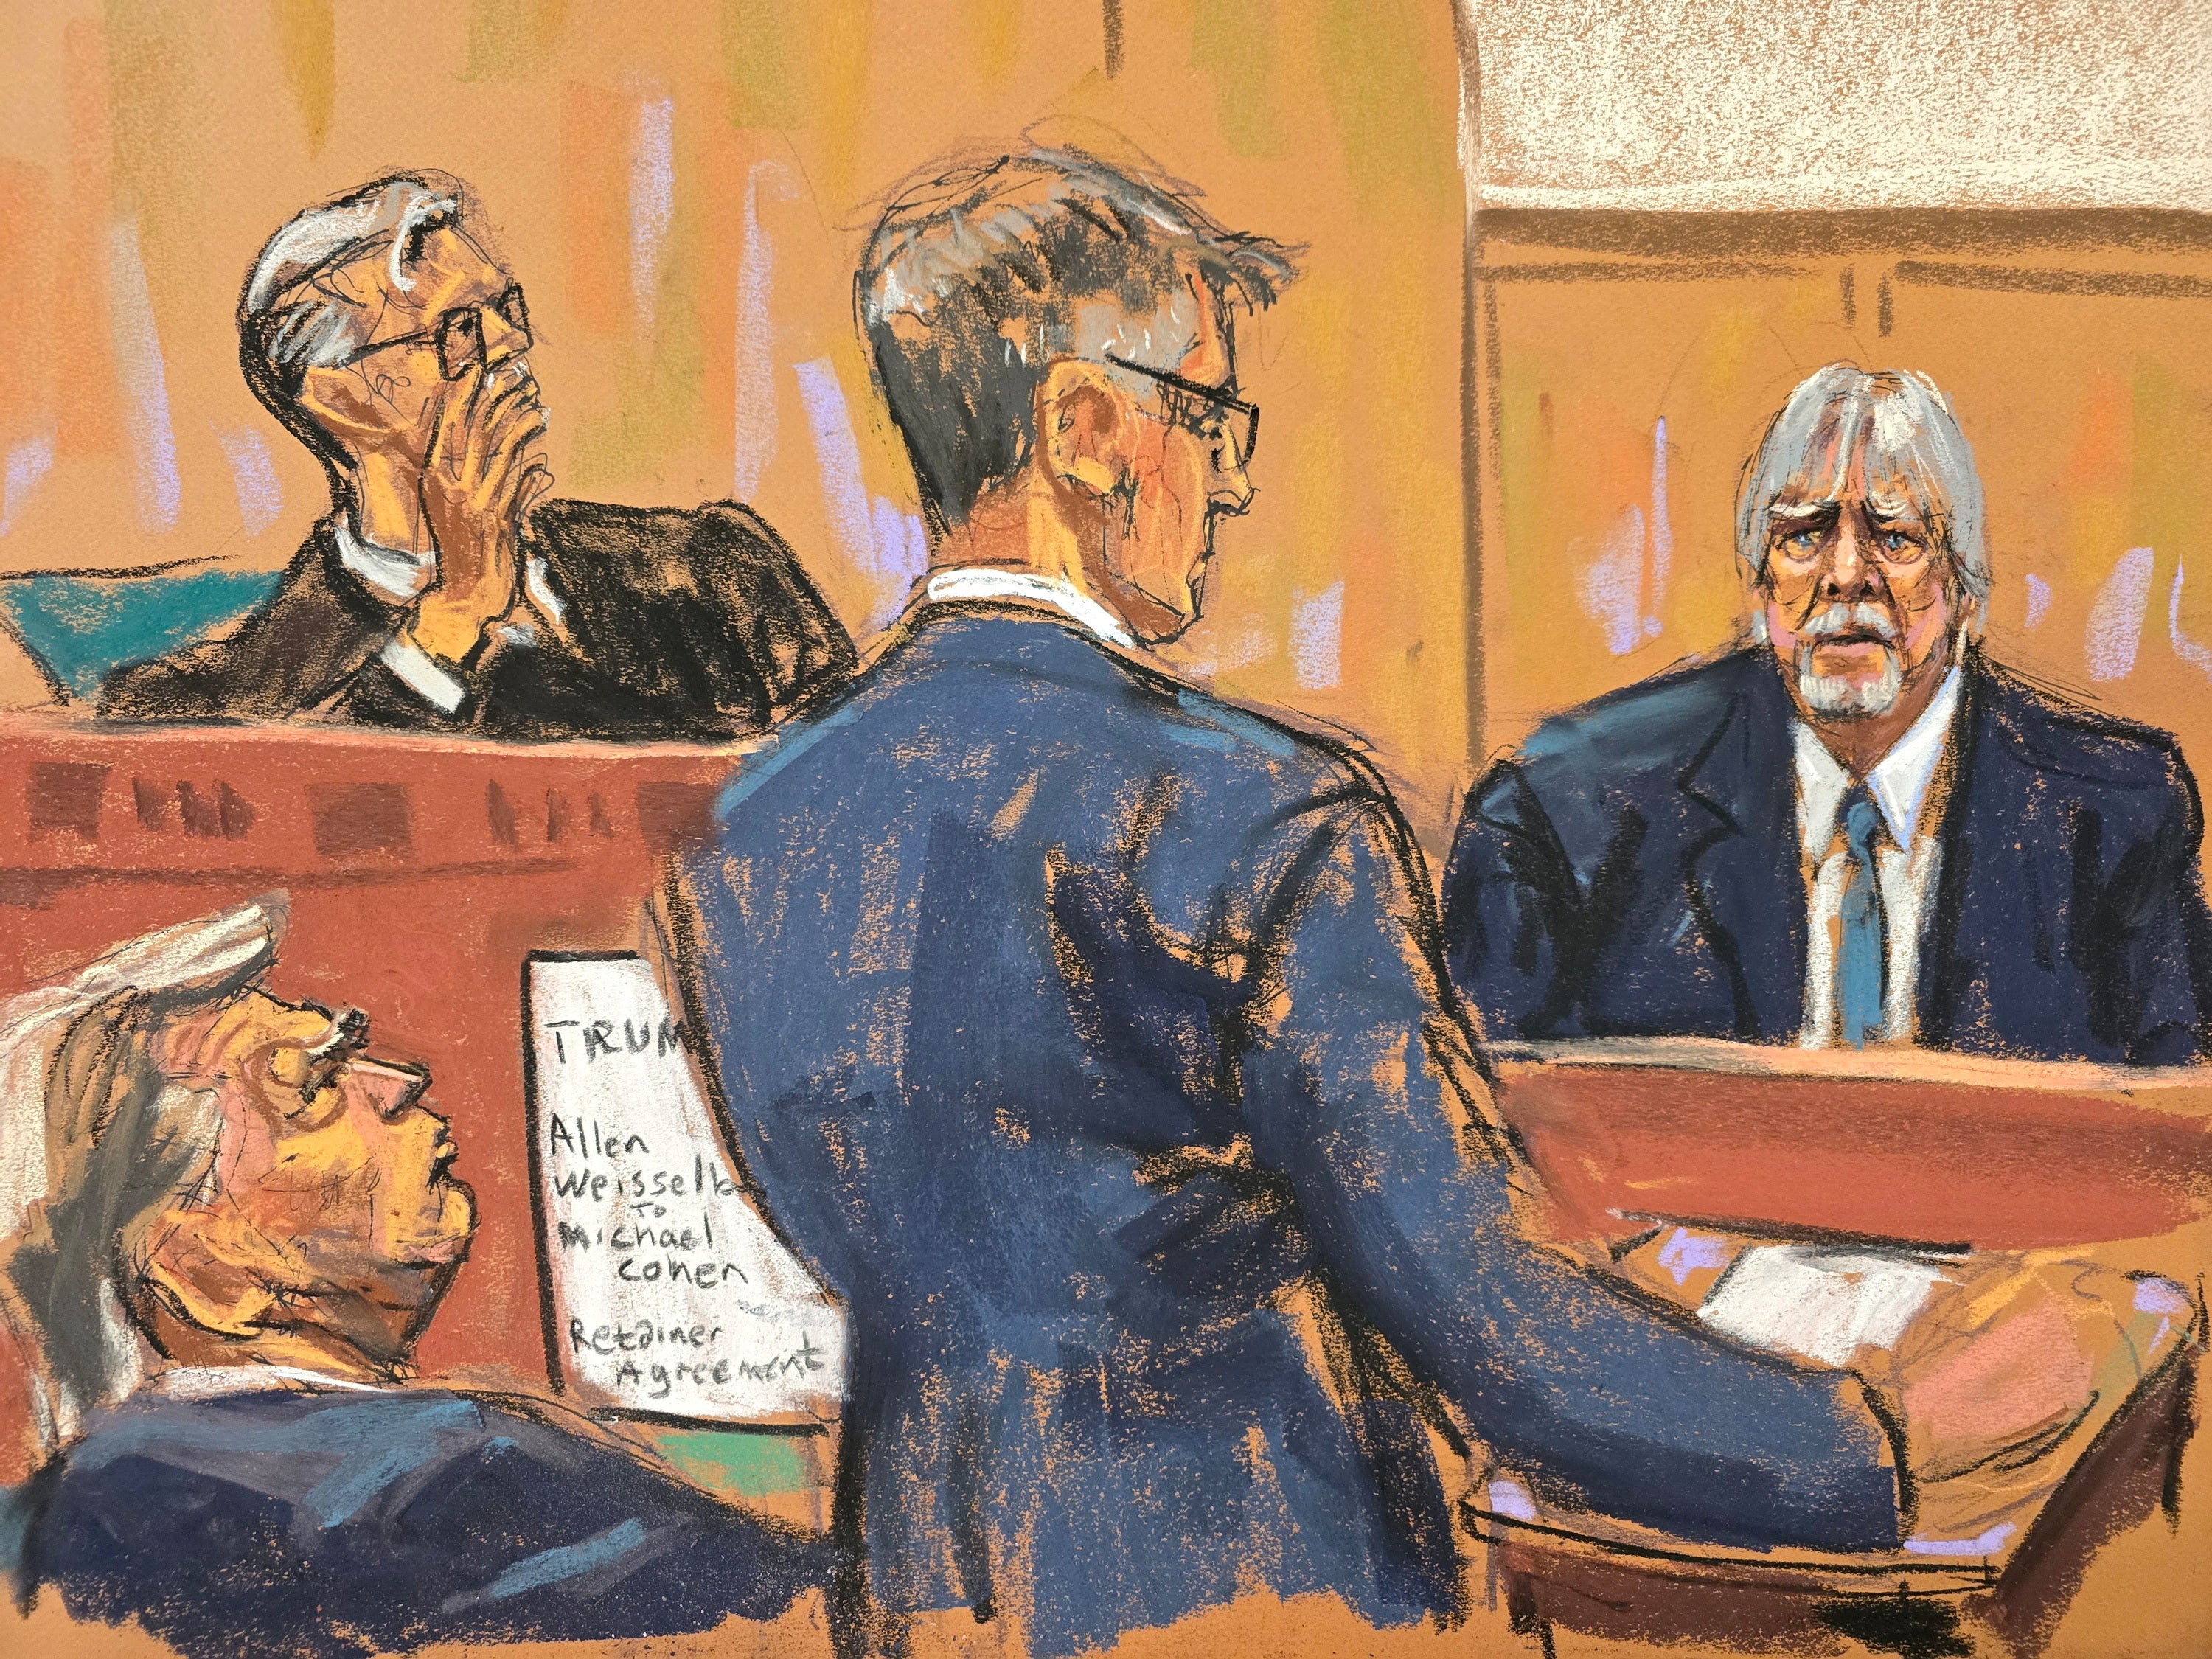 trump trial live: judge threatens jail over gag order violations as hush money testimony continues